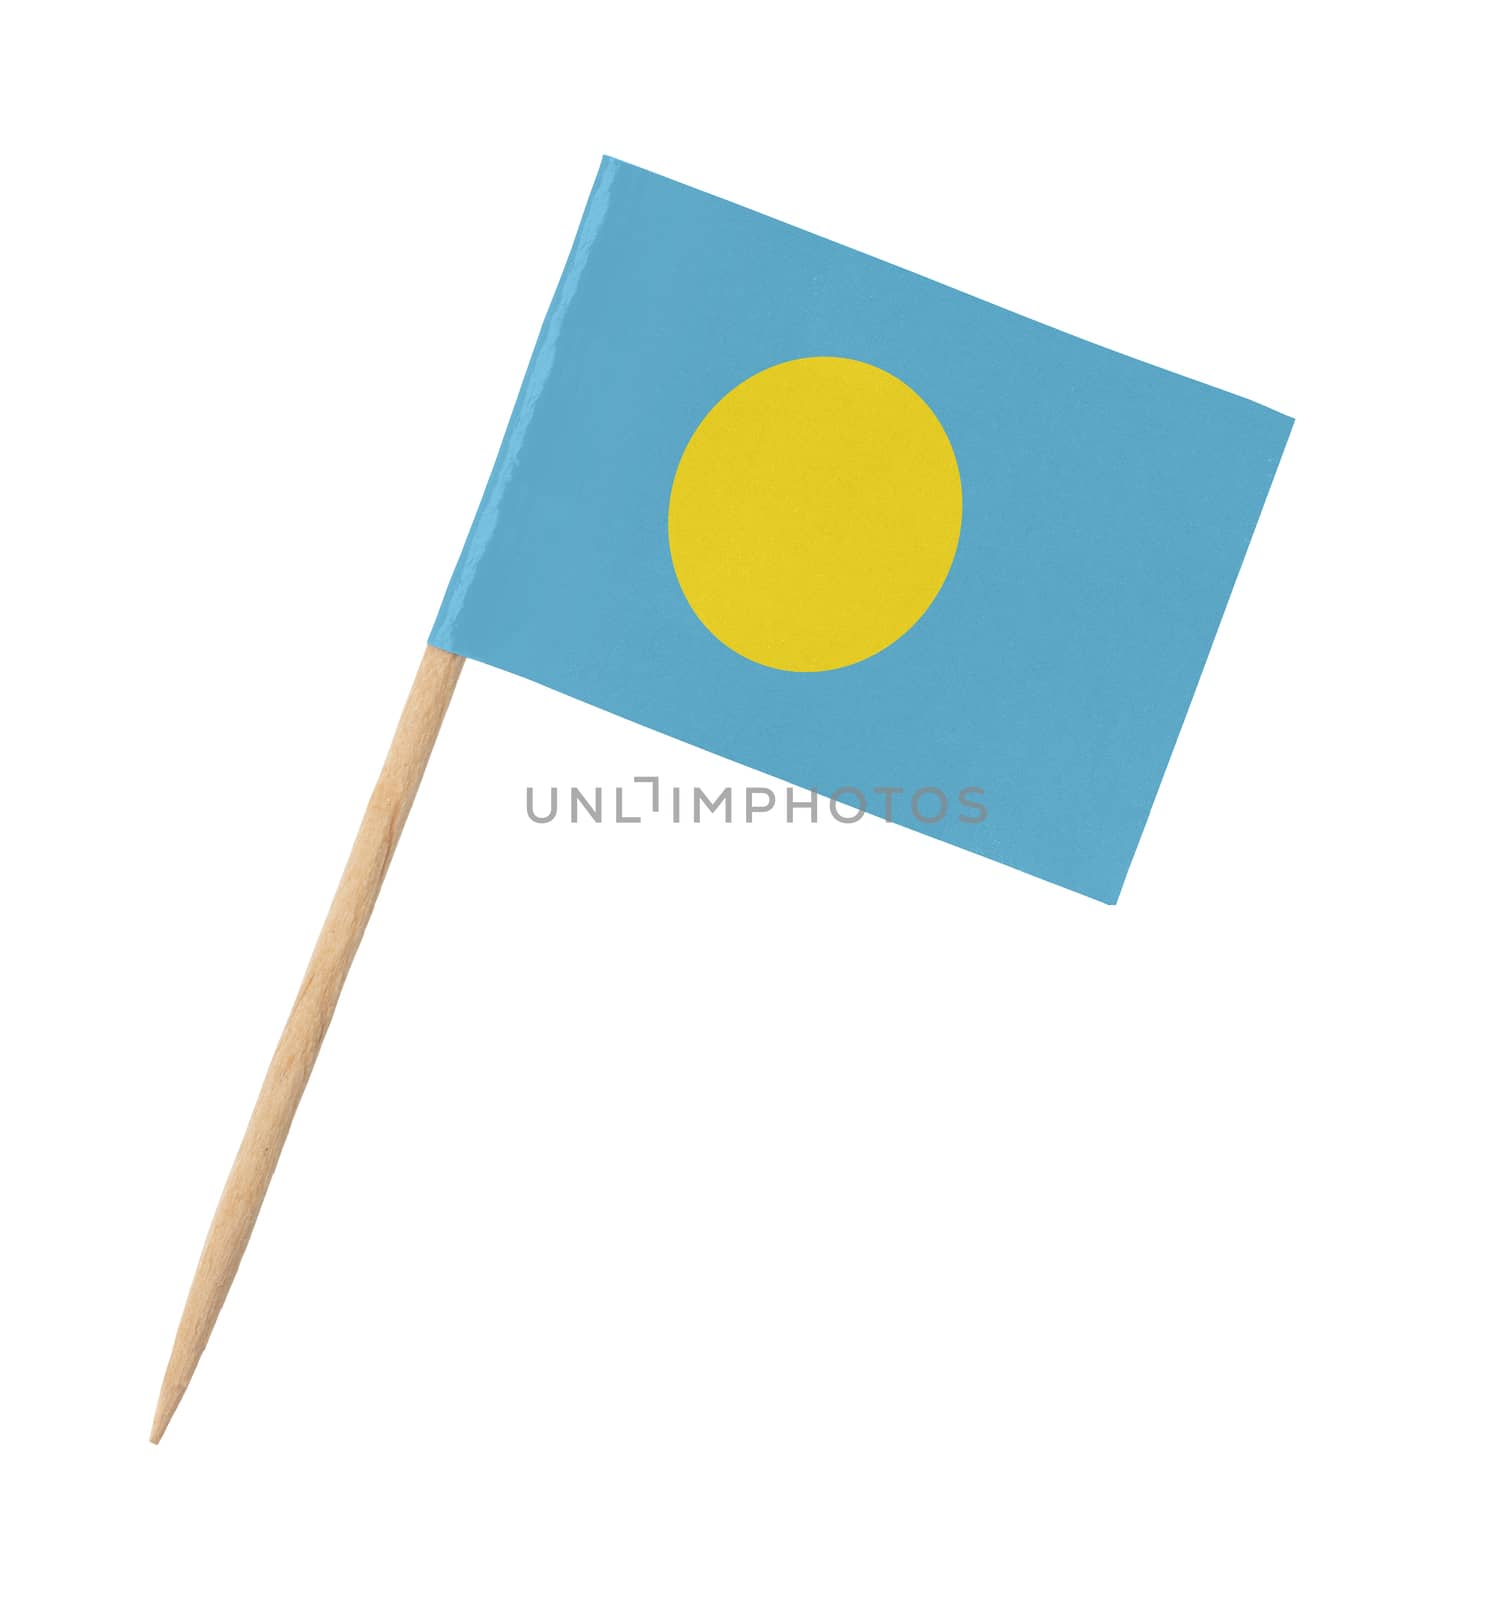 Small paper flag of Palau on wooden stick, isolated on white